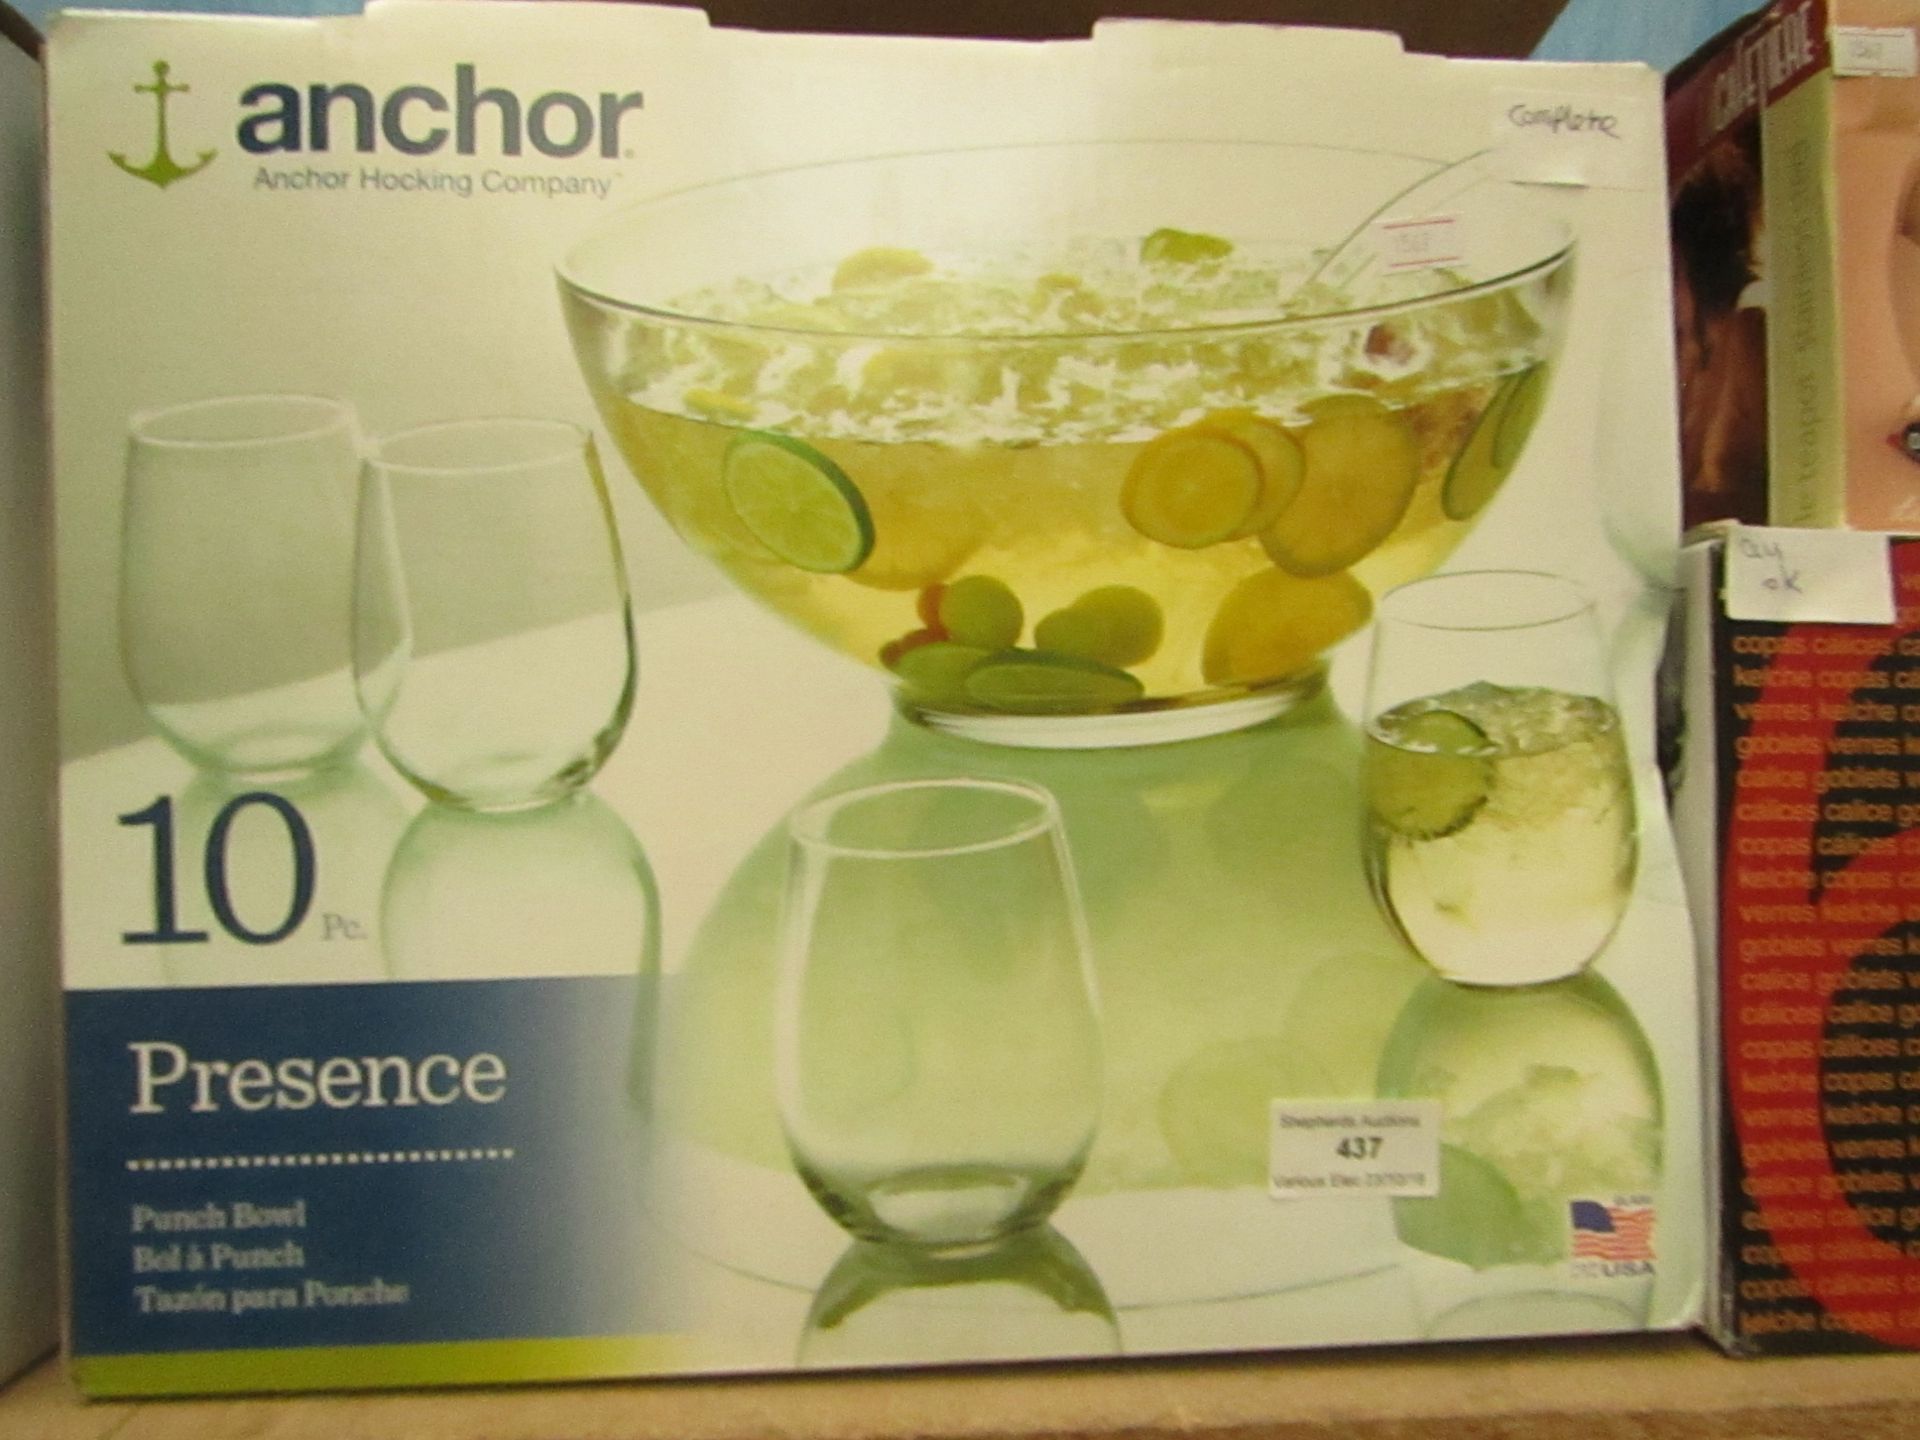 Anchor 10 piece glass set, contains 9 glasses and 1 bowl, new an boxed.